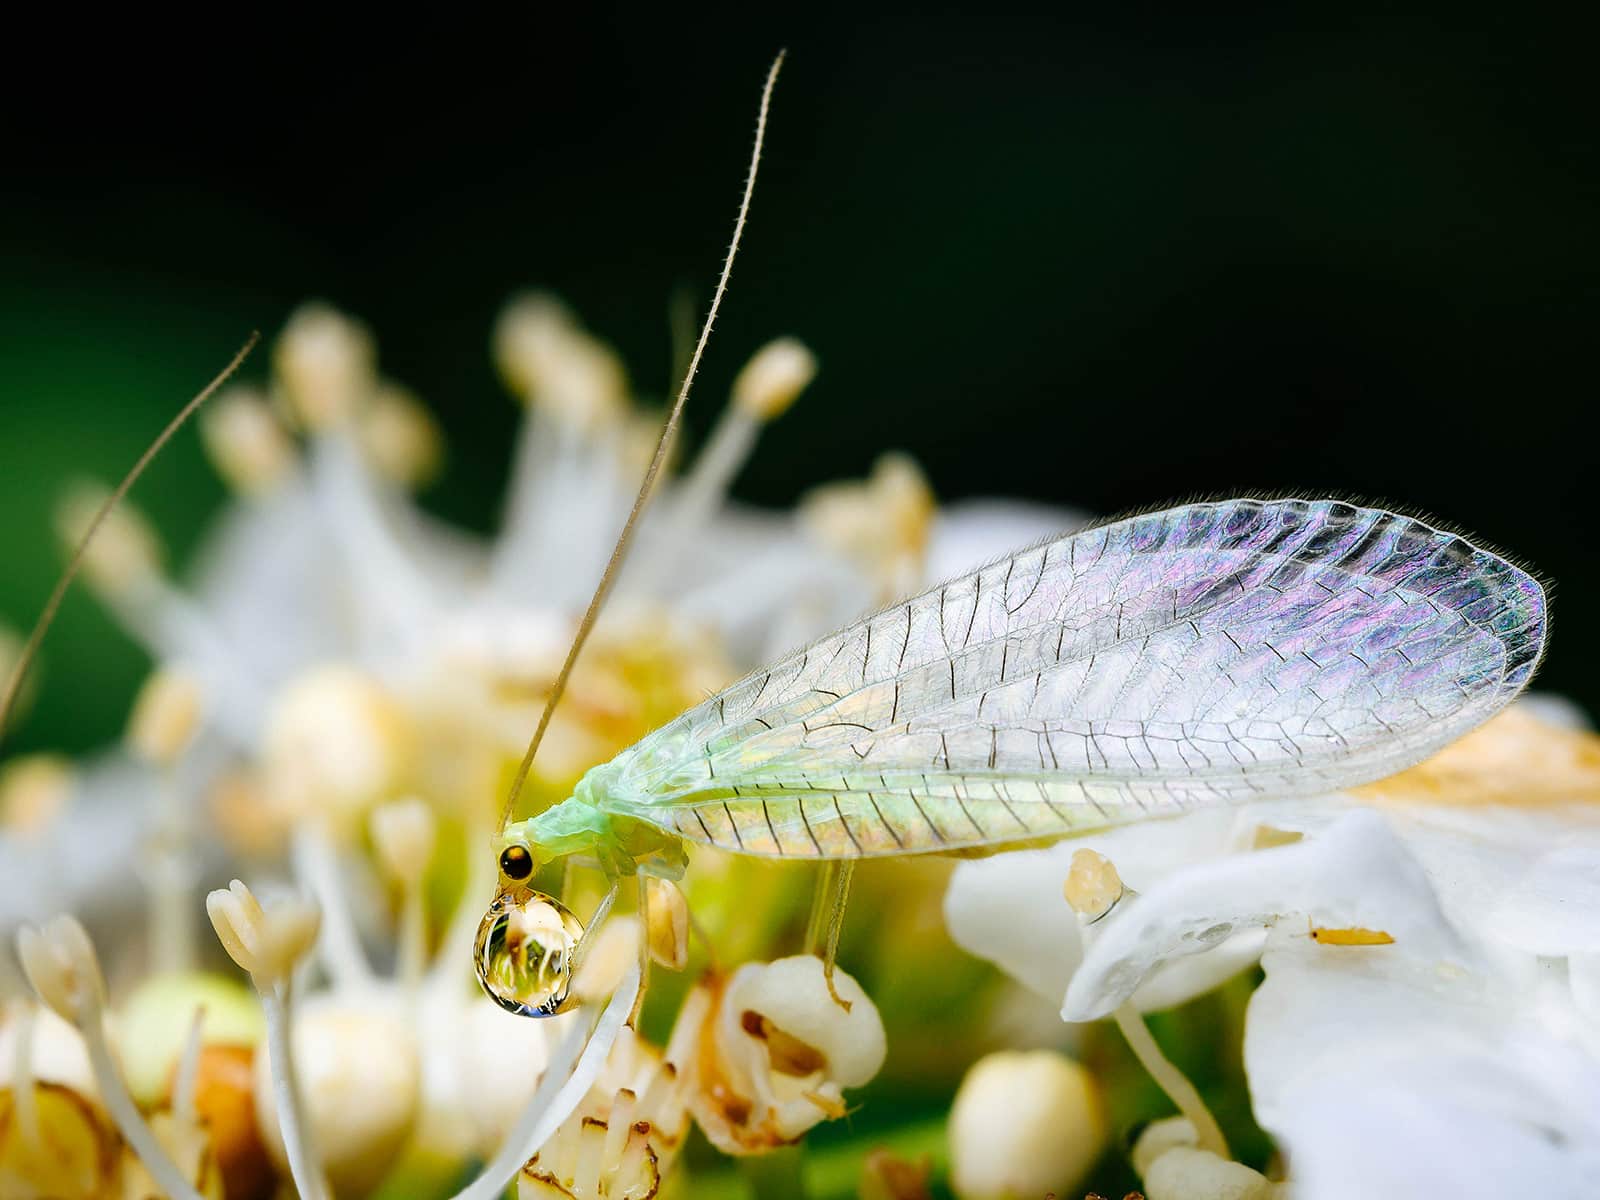 A green lacewing holding a water droplet with its front legs while perched on a flower head